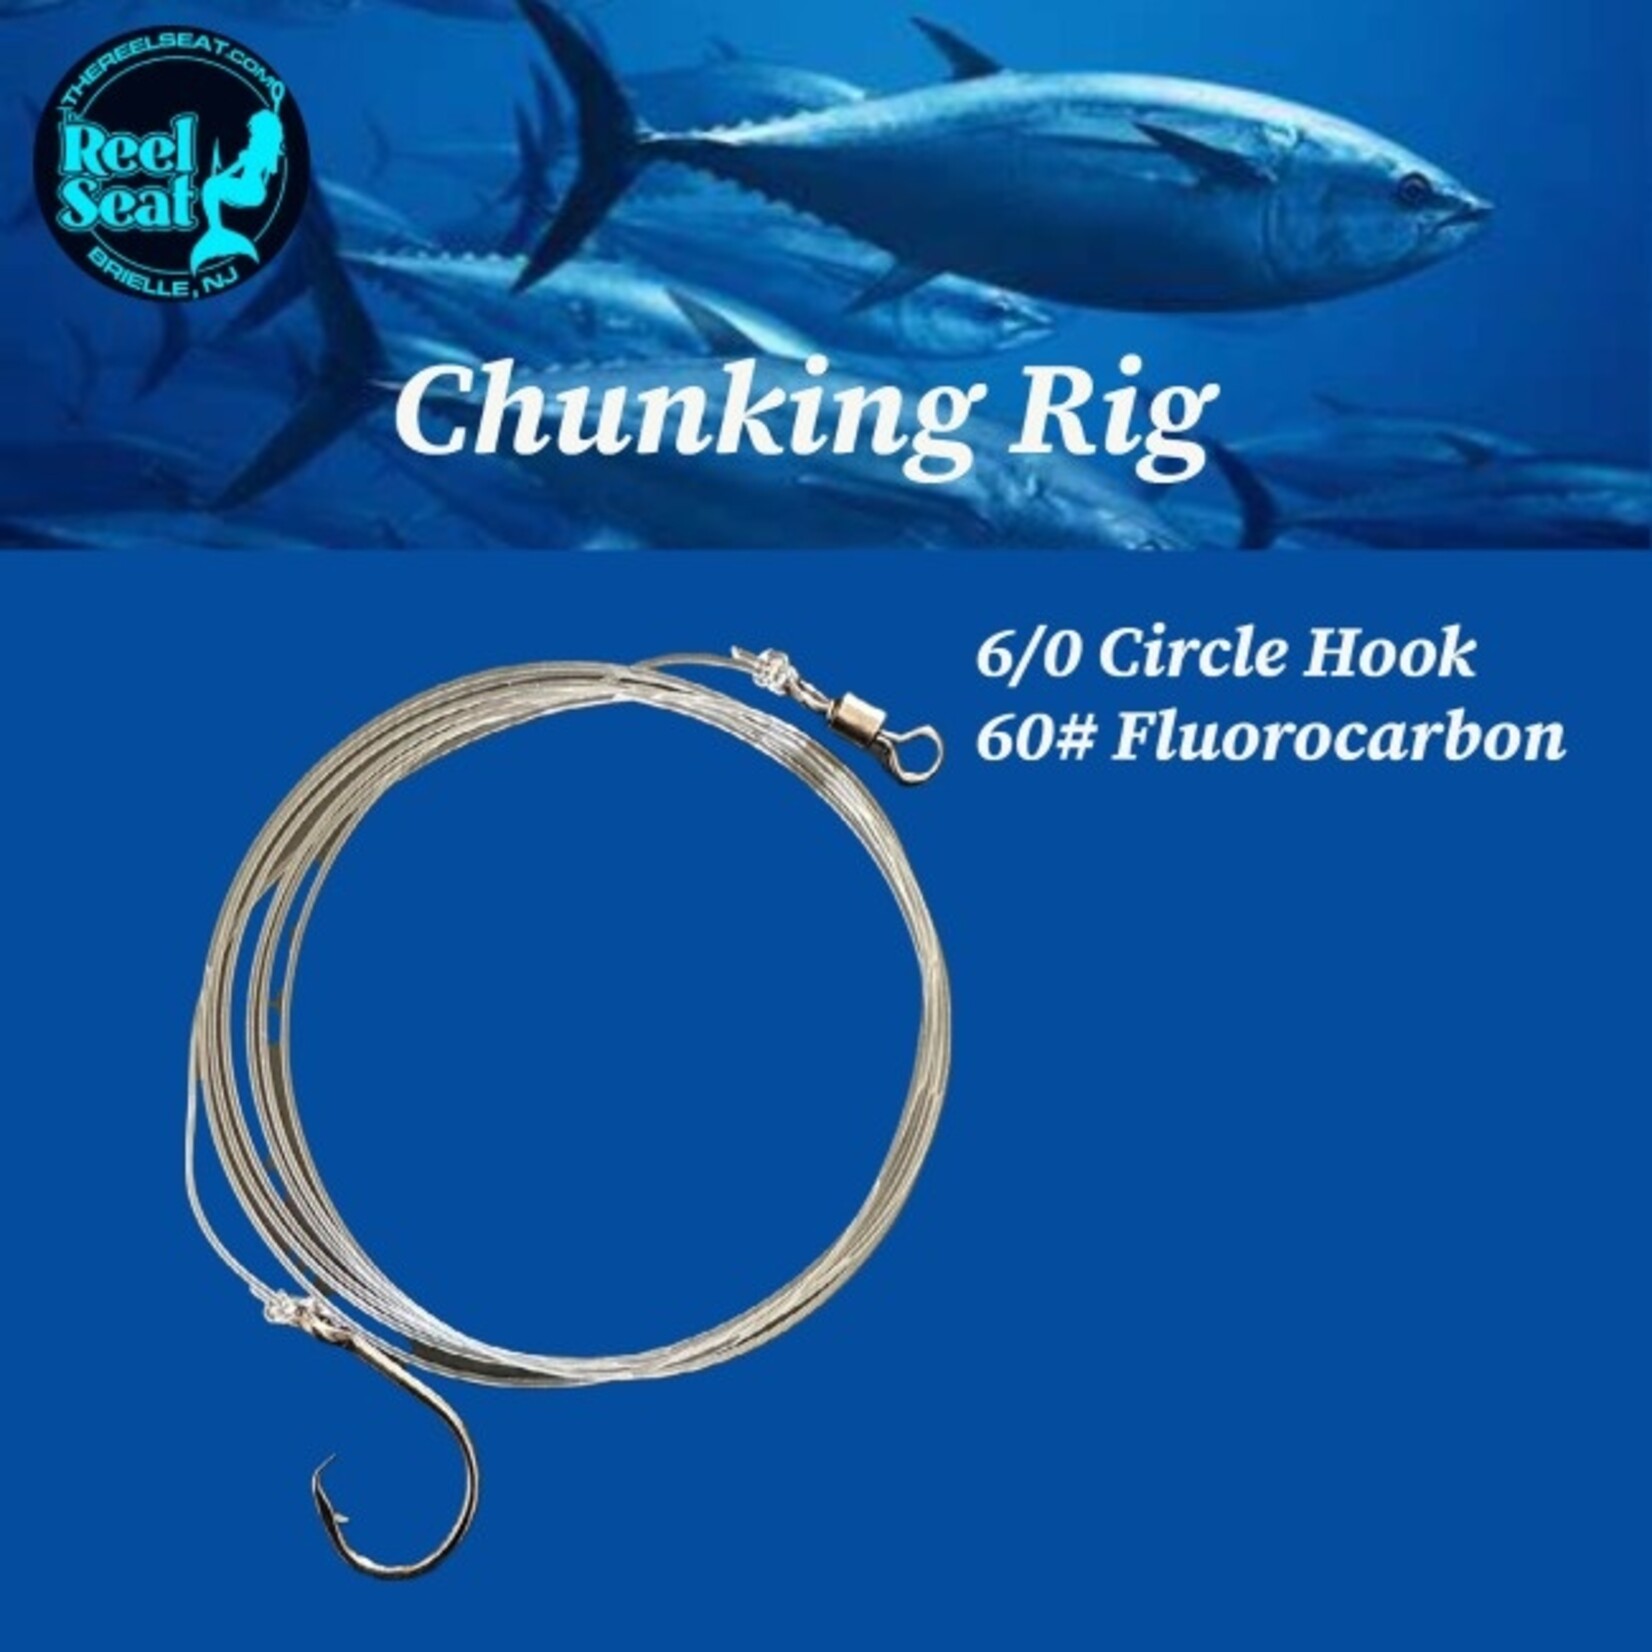 The Reel Seat RS Chunking Rig 6/0 circle hook on 60 lbs Fluoro